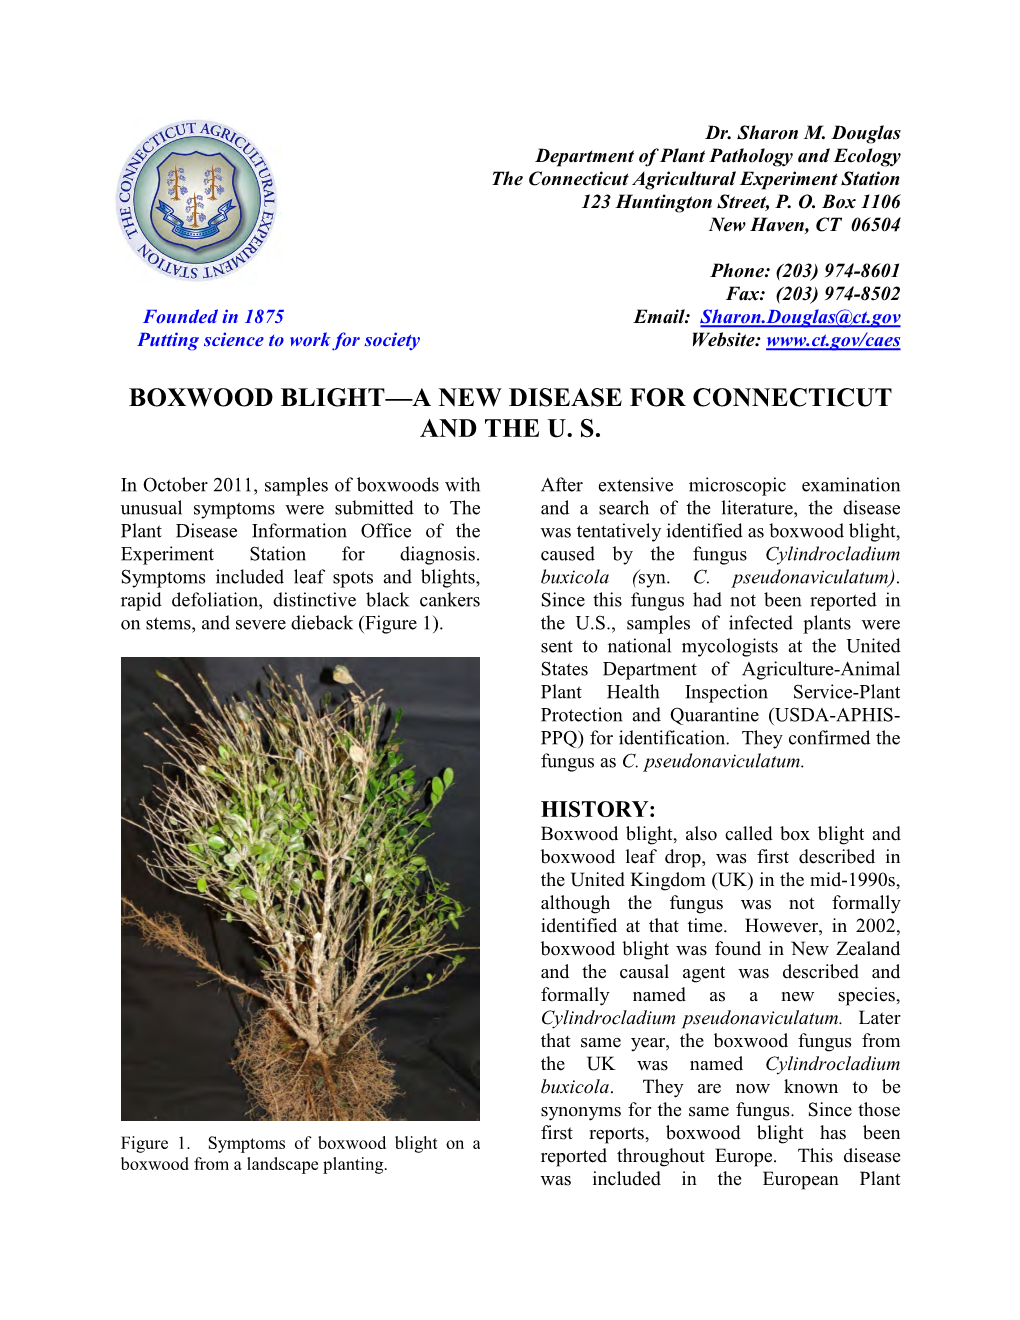 Boxwood Blight--A New Disease for Connecticut and the US